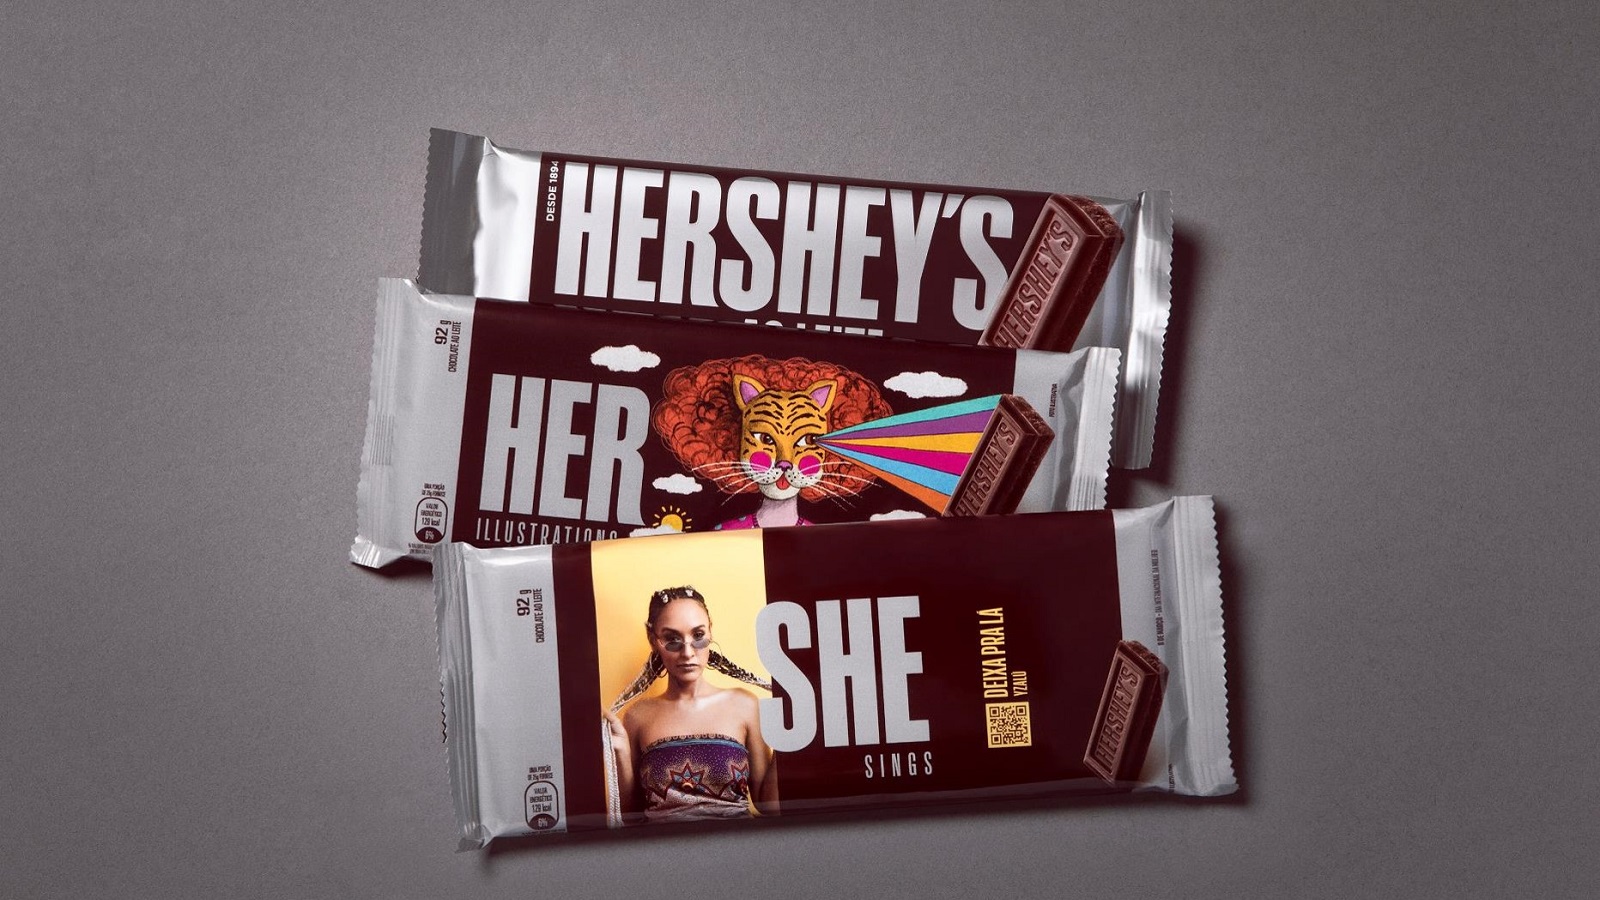 Hershey’s Lends Packaging for Women to Express Creativity